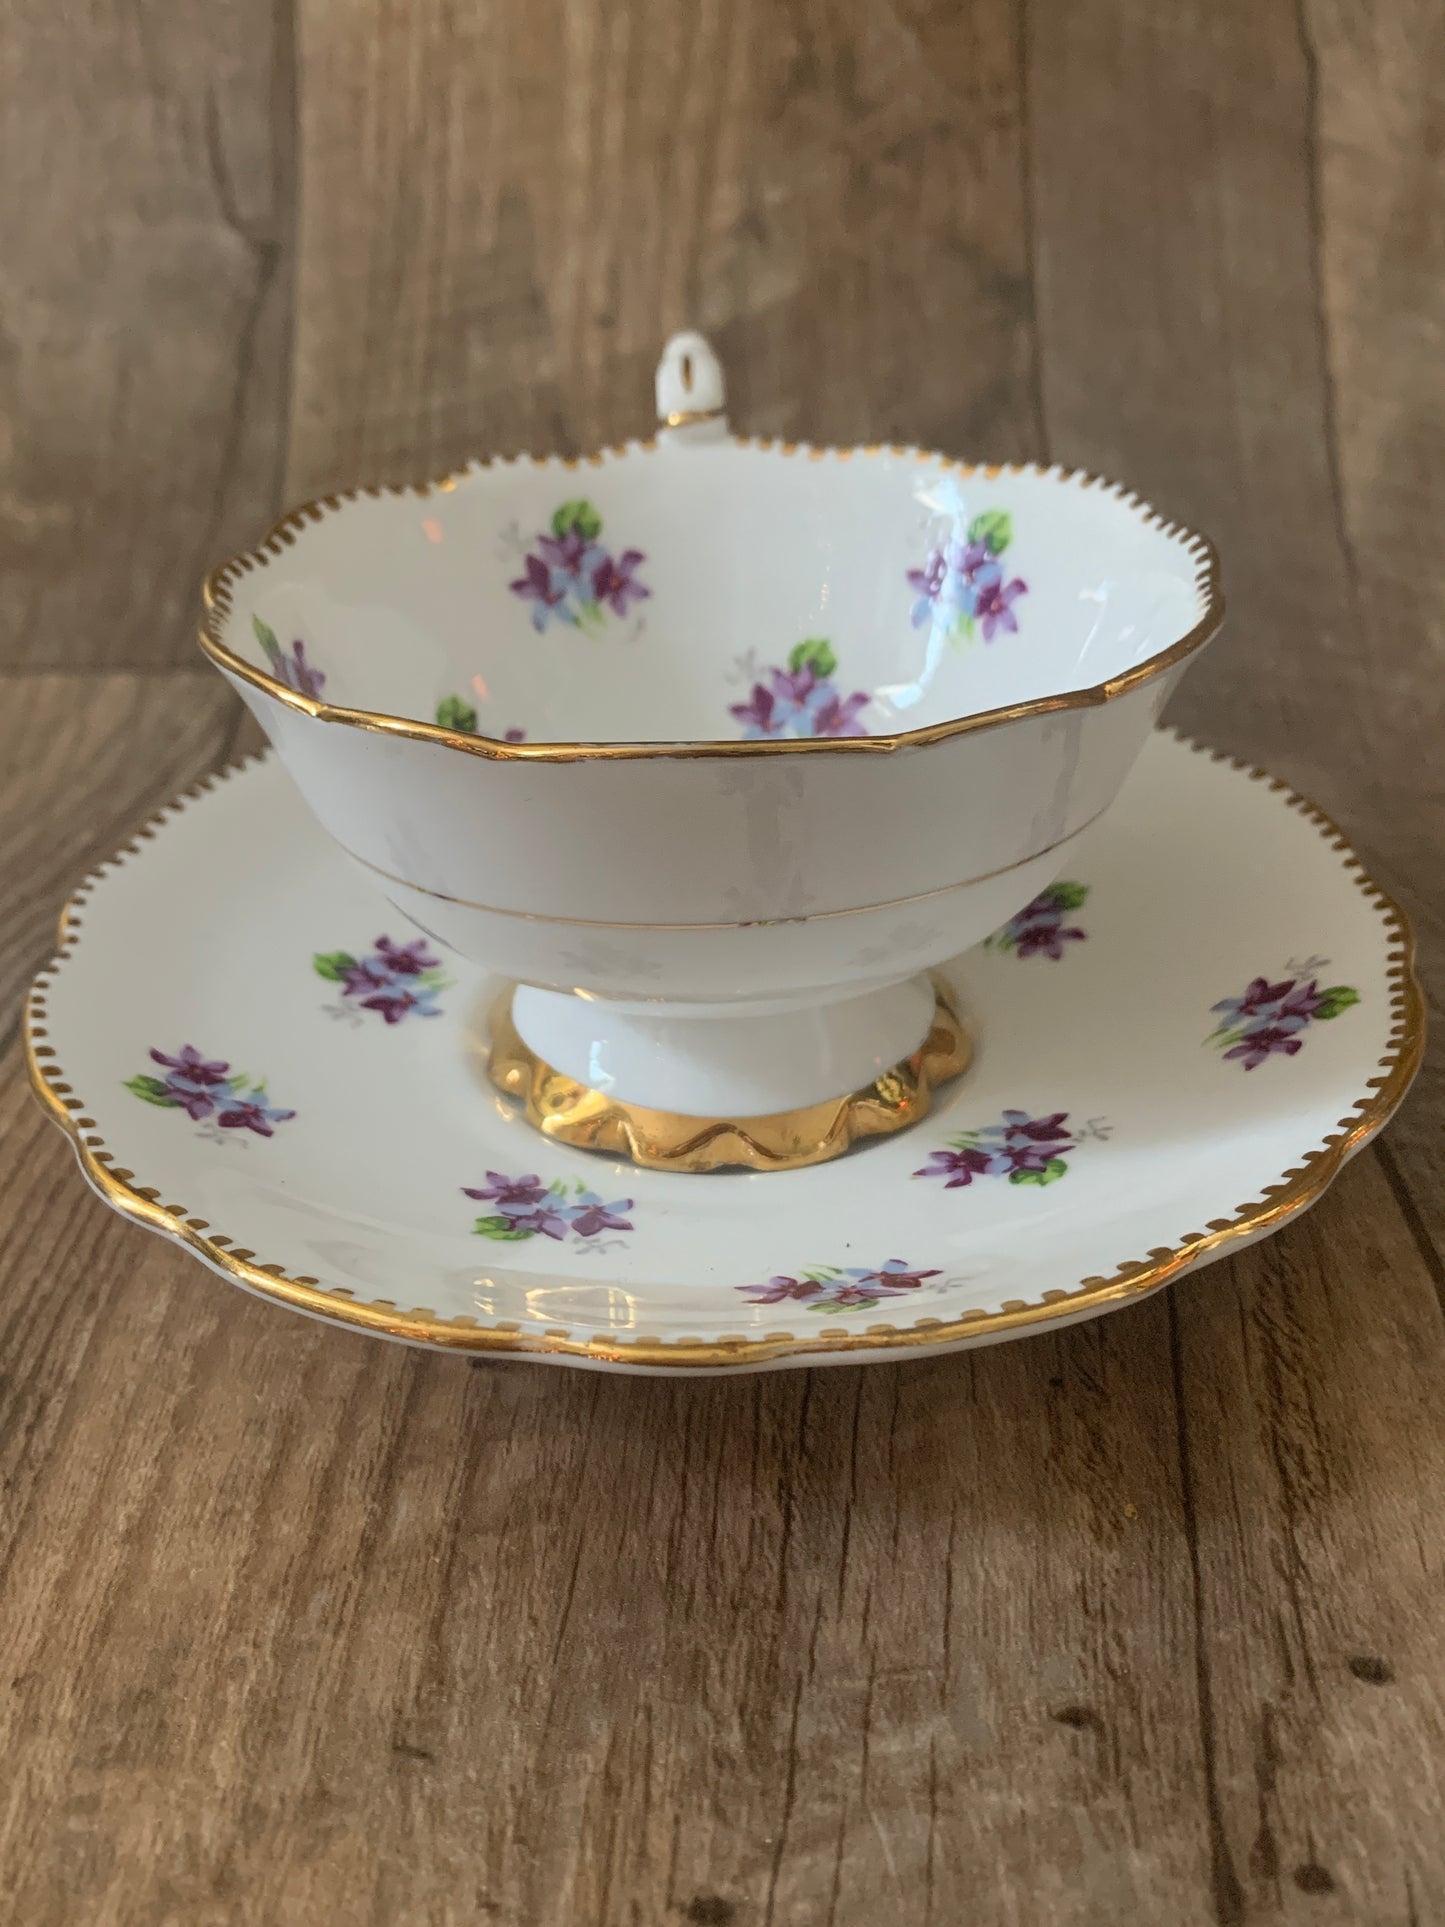 Vintage Teacup and Saucer with Purple Violets Wide Mouth Tea Cup and Saucer Set Mothers Day Gifts